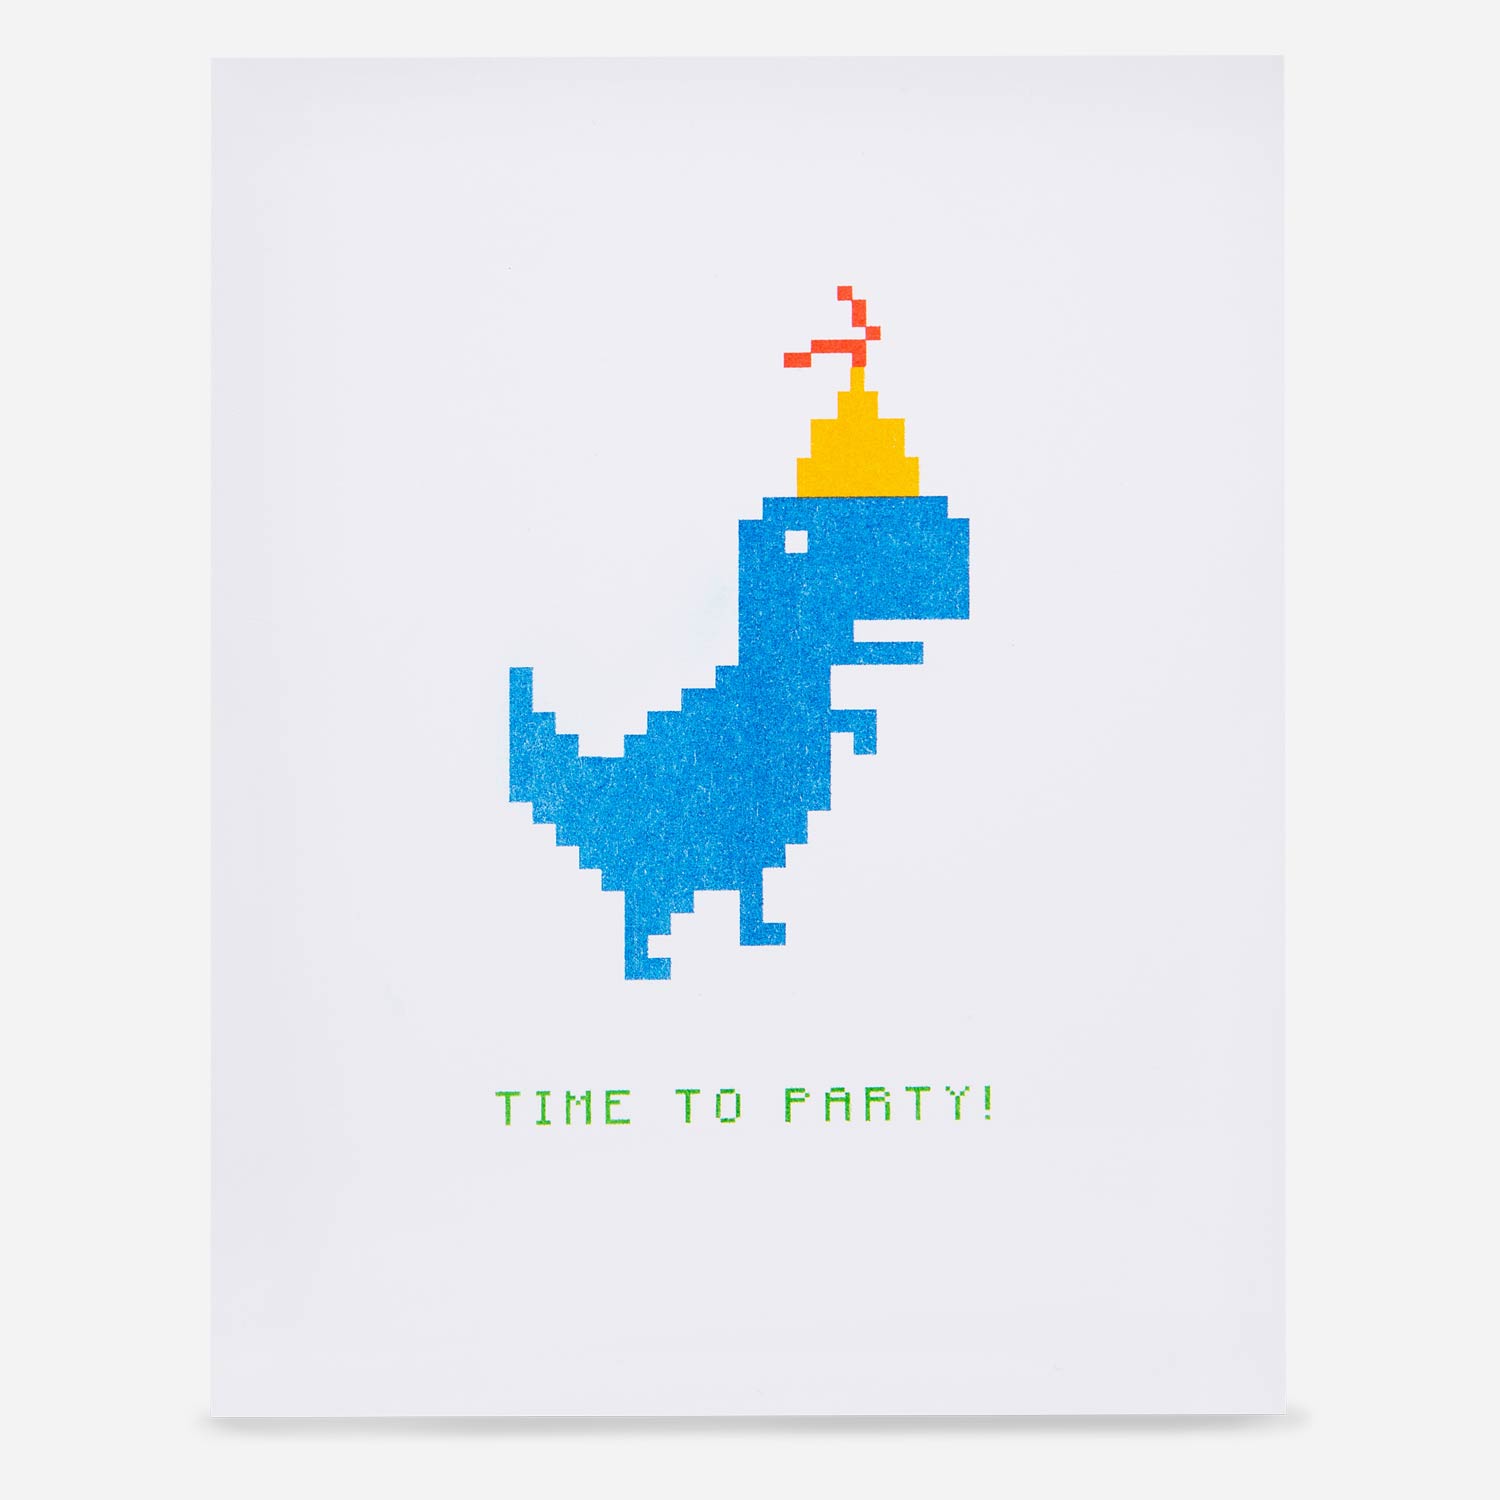 Chrome Dino Party Time Greeting Card